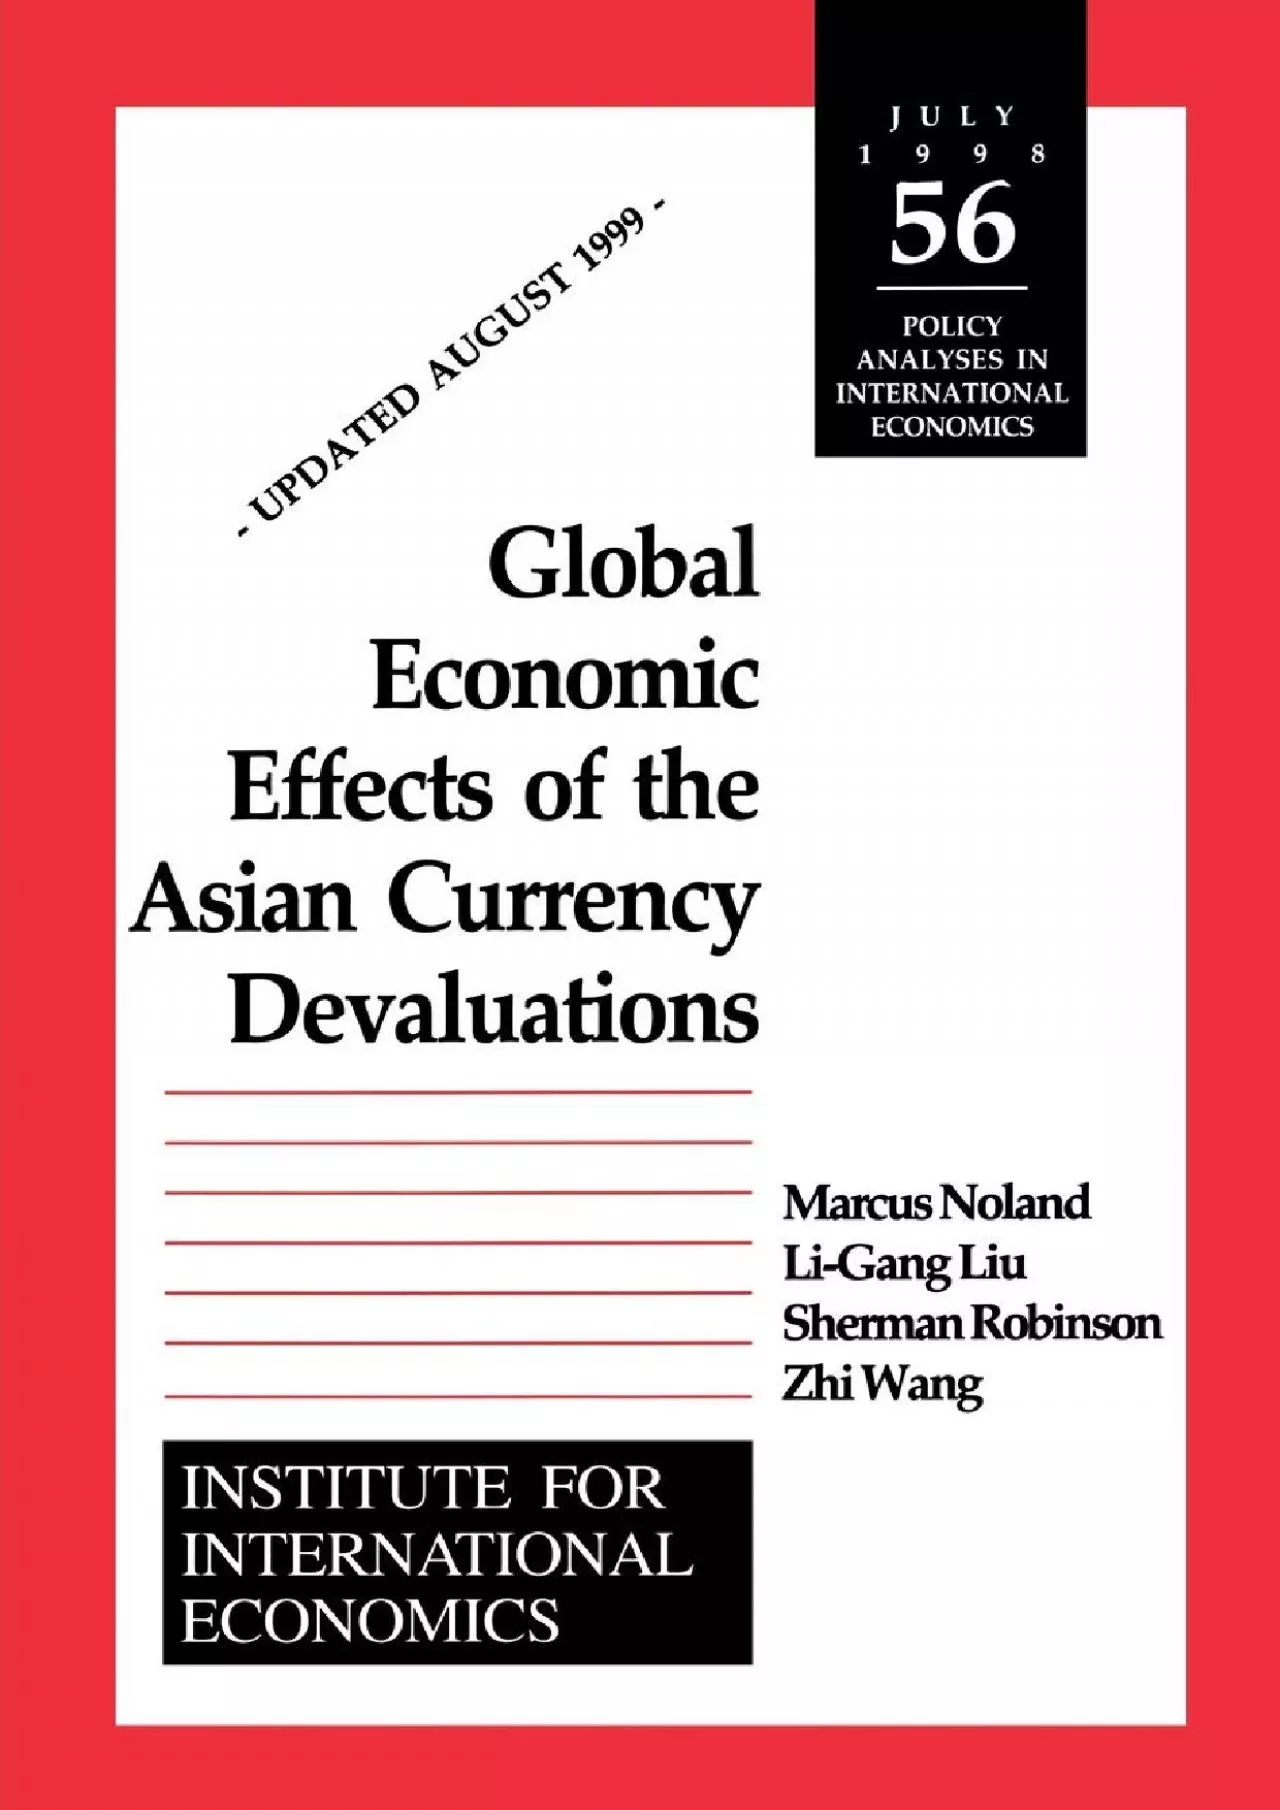 Global Economic Effects of the Asian Currency Devaluations (Policy Analyses in International